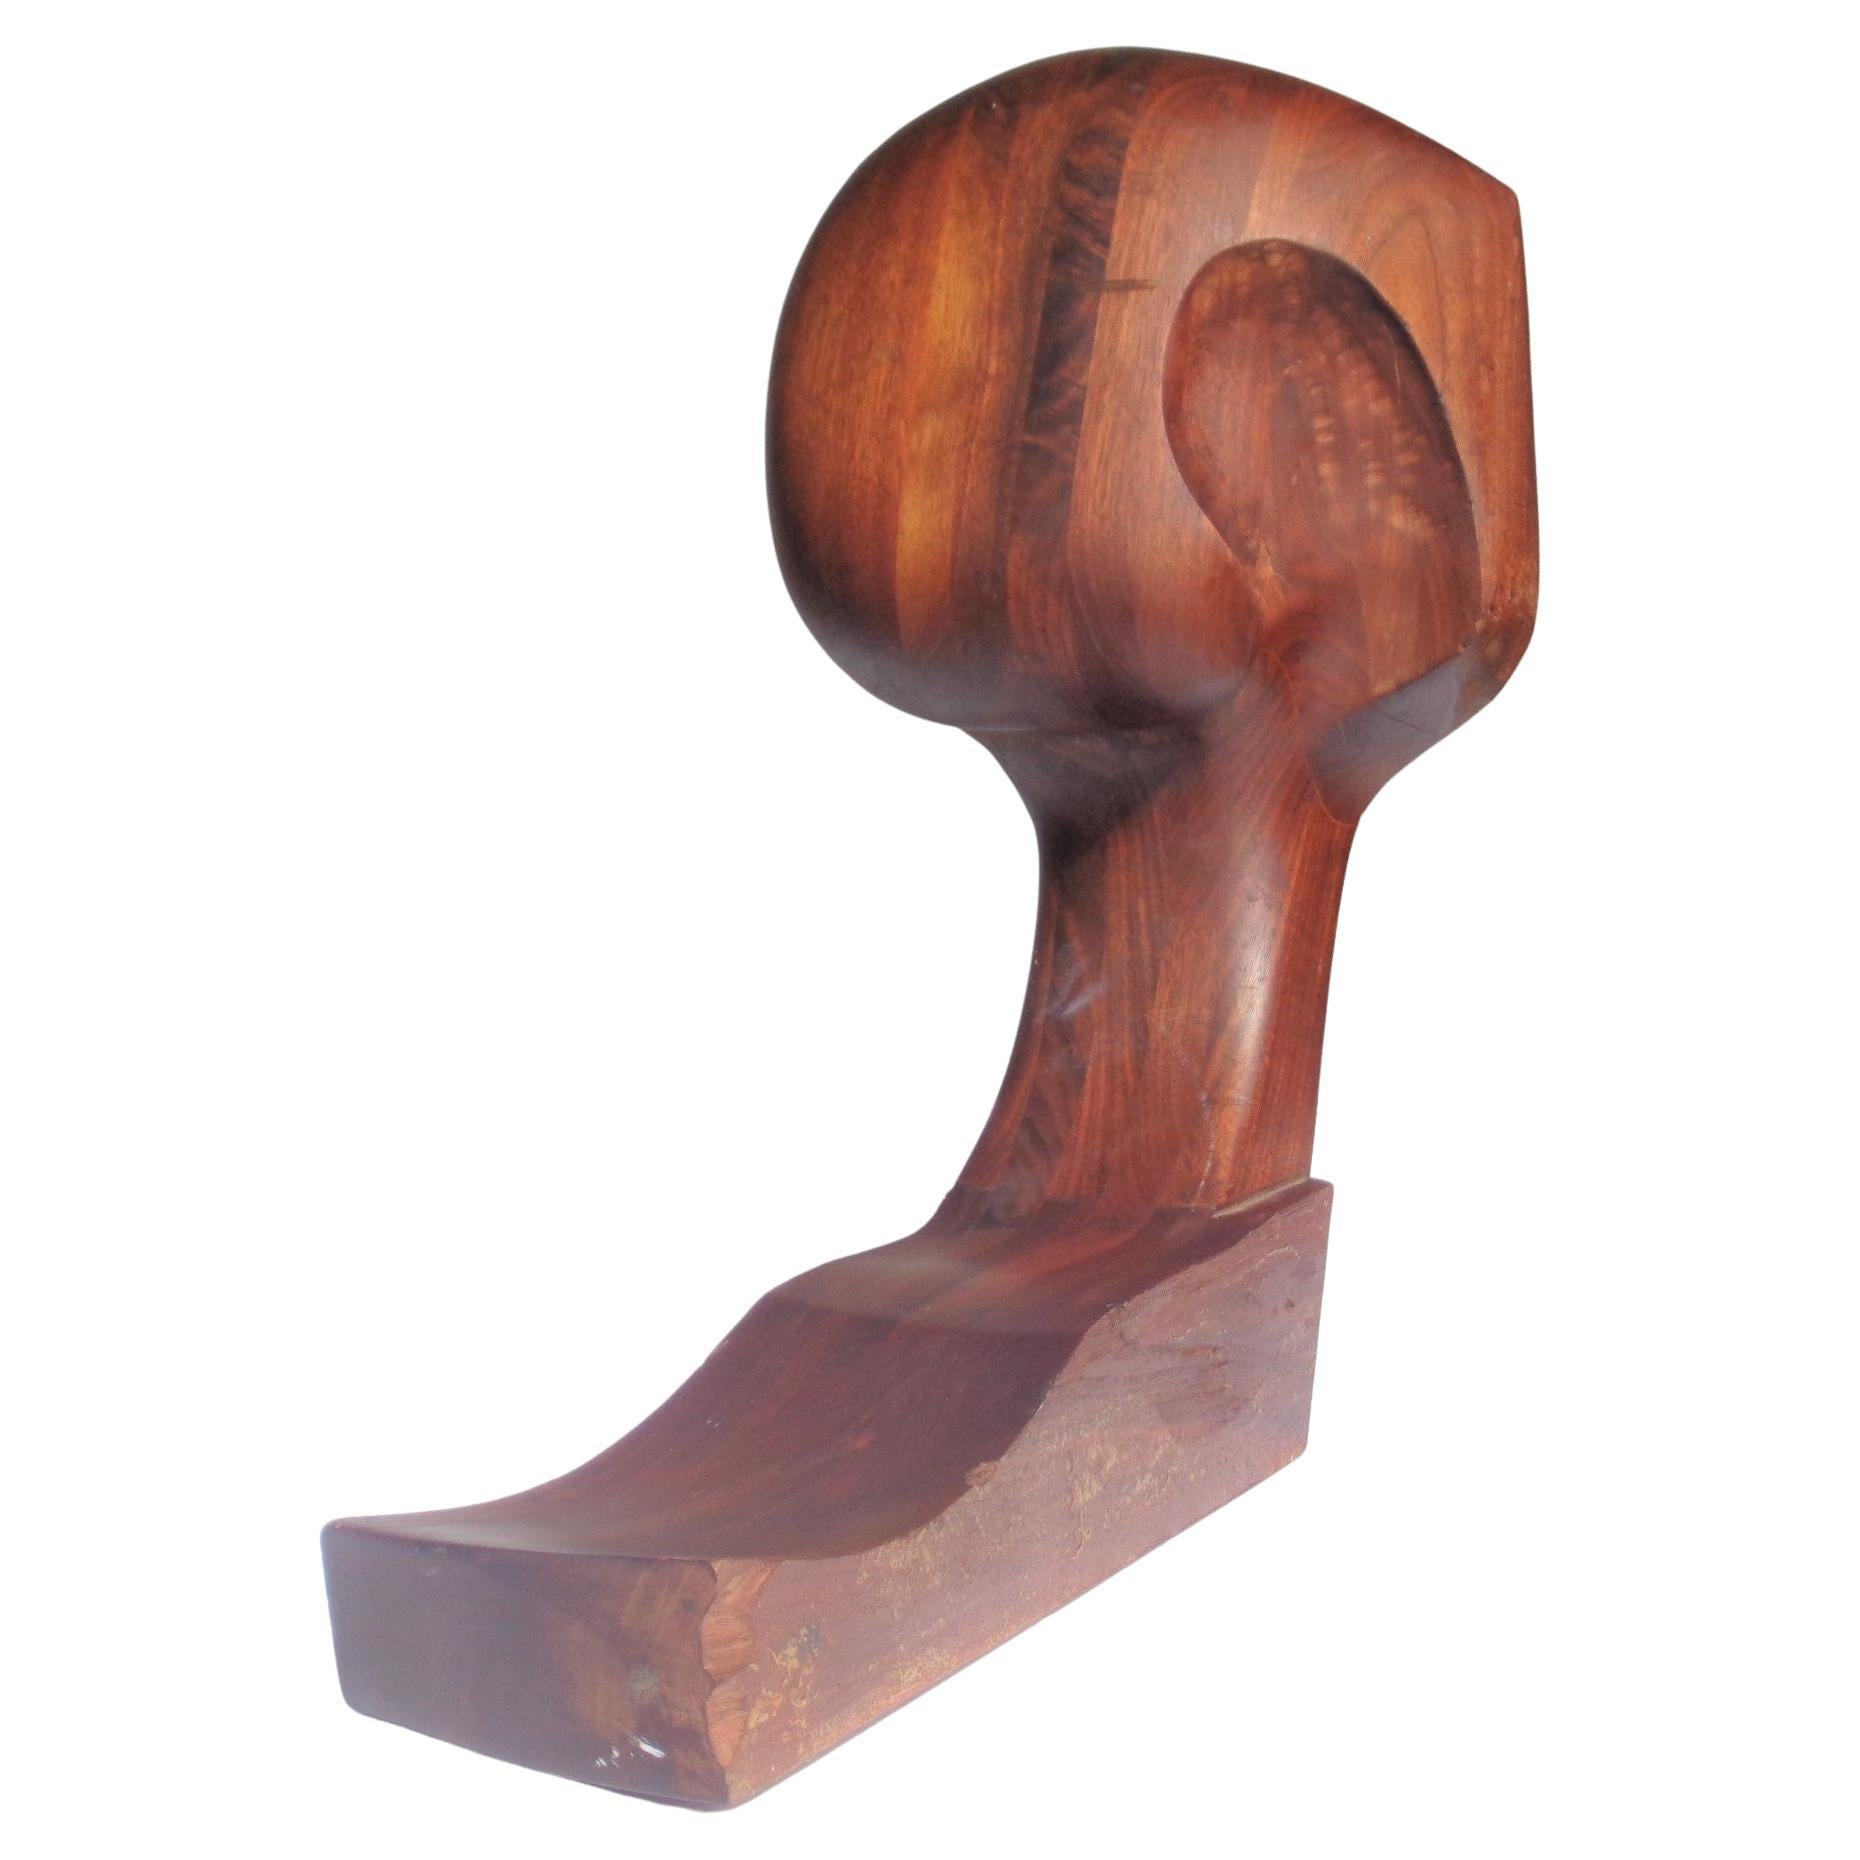 American Studio Craft Movement Abstract Sculpture Wood Bust, 1970-1980 For Sale 8